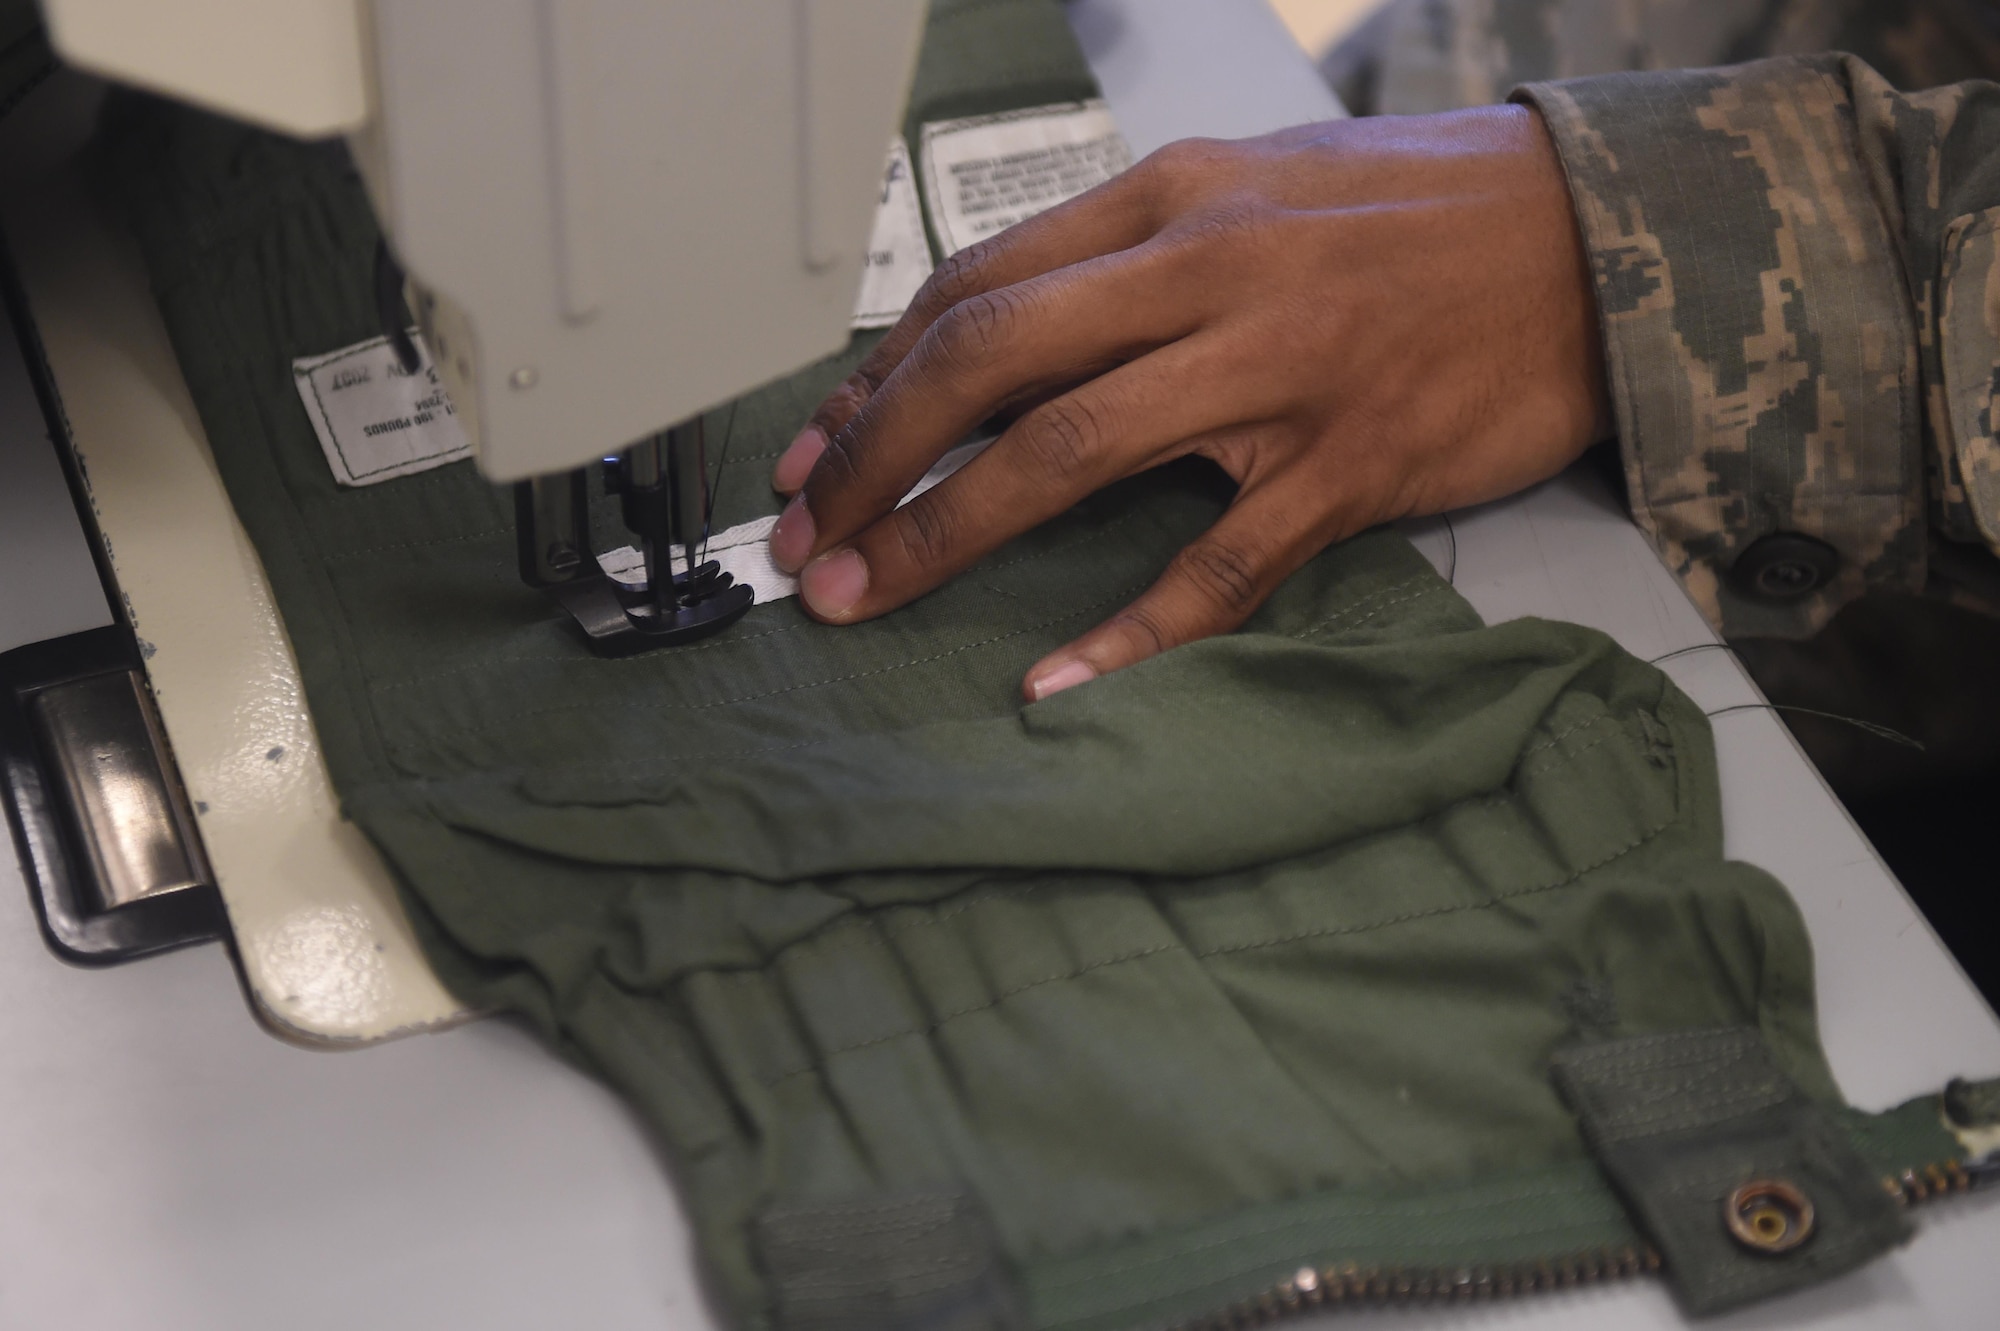 Airman 1st Class Dondrel, a 49th Operations Support Squadron aircrew flight equipment technician, sews a patch of fabric on a G-Suit at Holloman Air Force Base, N.M., July 21. AFE specialists spend two weeks in technical training learning how to operate and maintain sewing equipment. (Last names are being withheld due to operational requirements. U.S. Air Force photo by Staff Sgt. Eboni Prince)